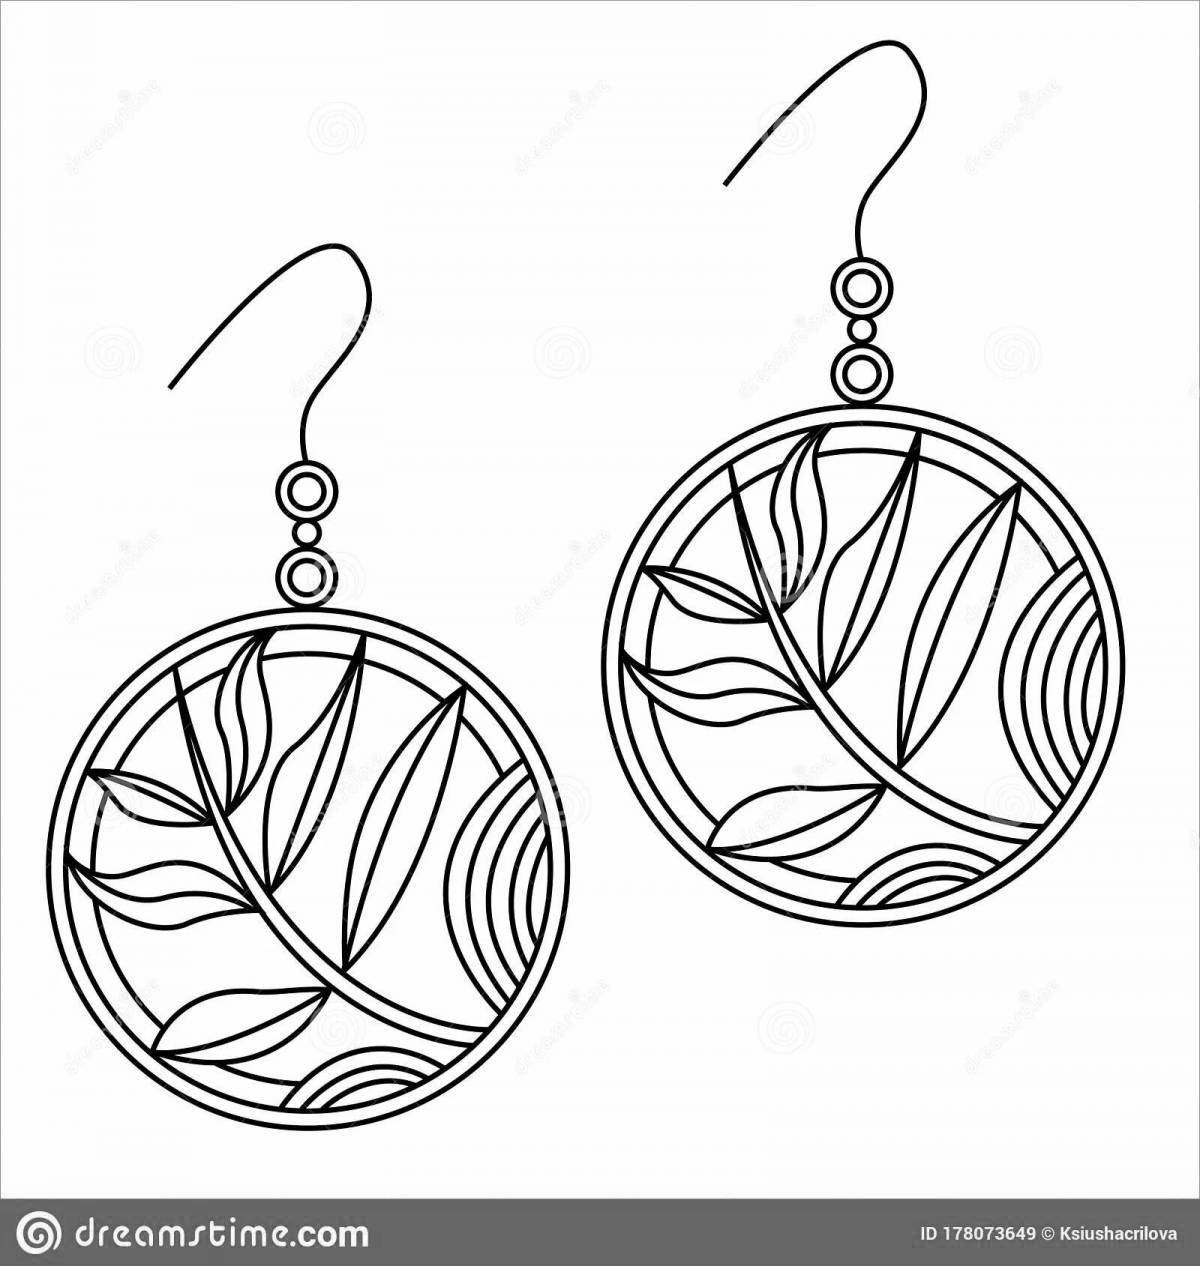 Adorable earring coloring pages for kids